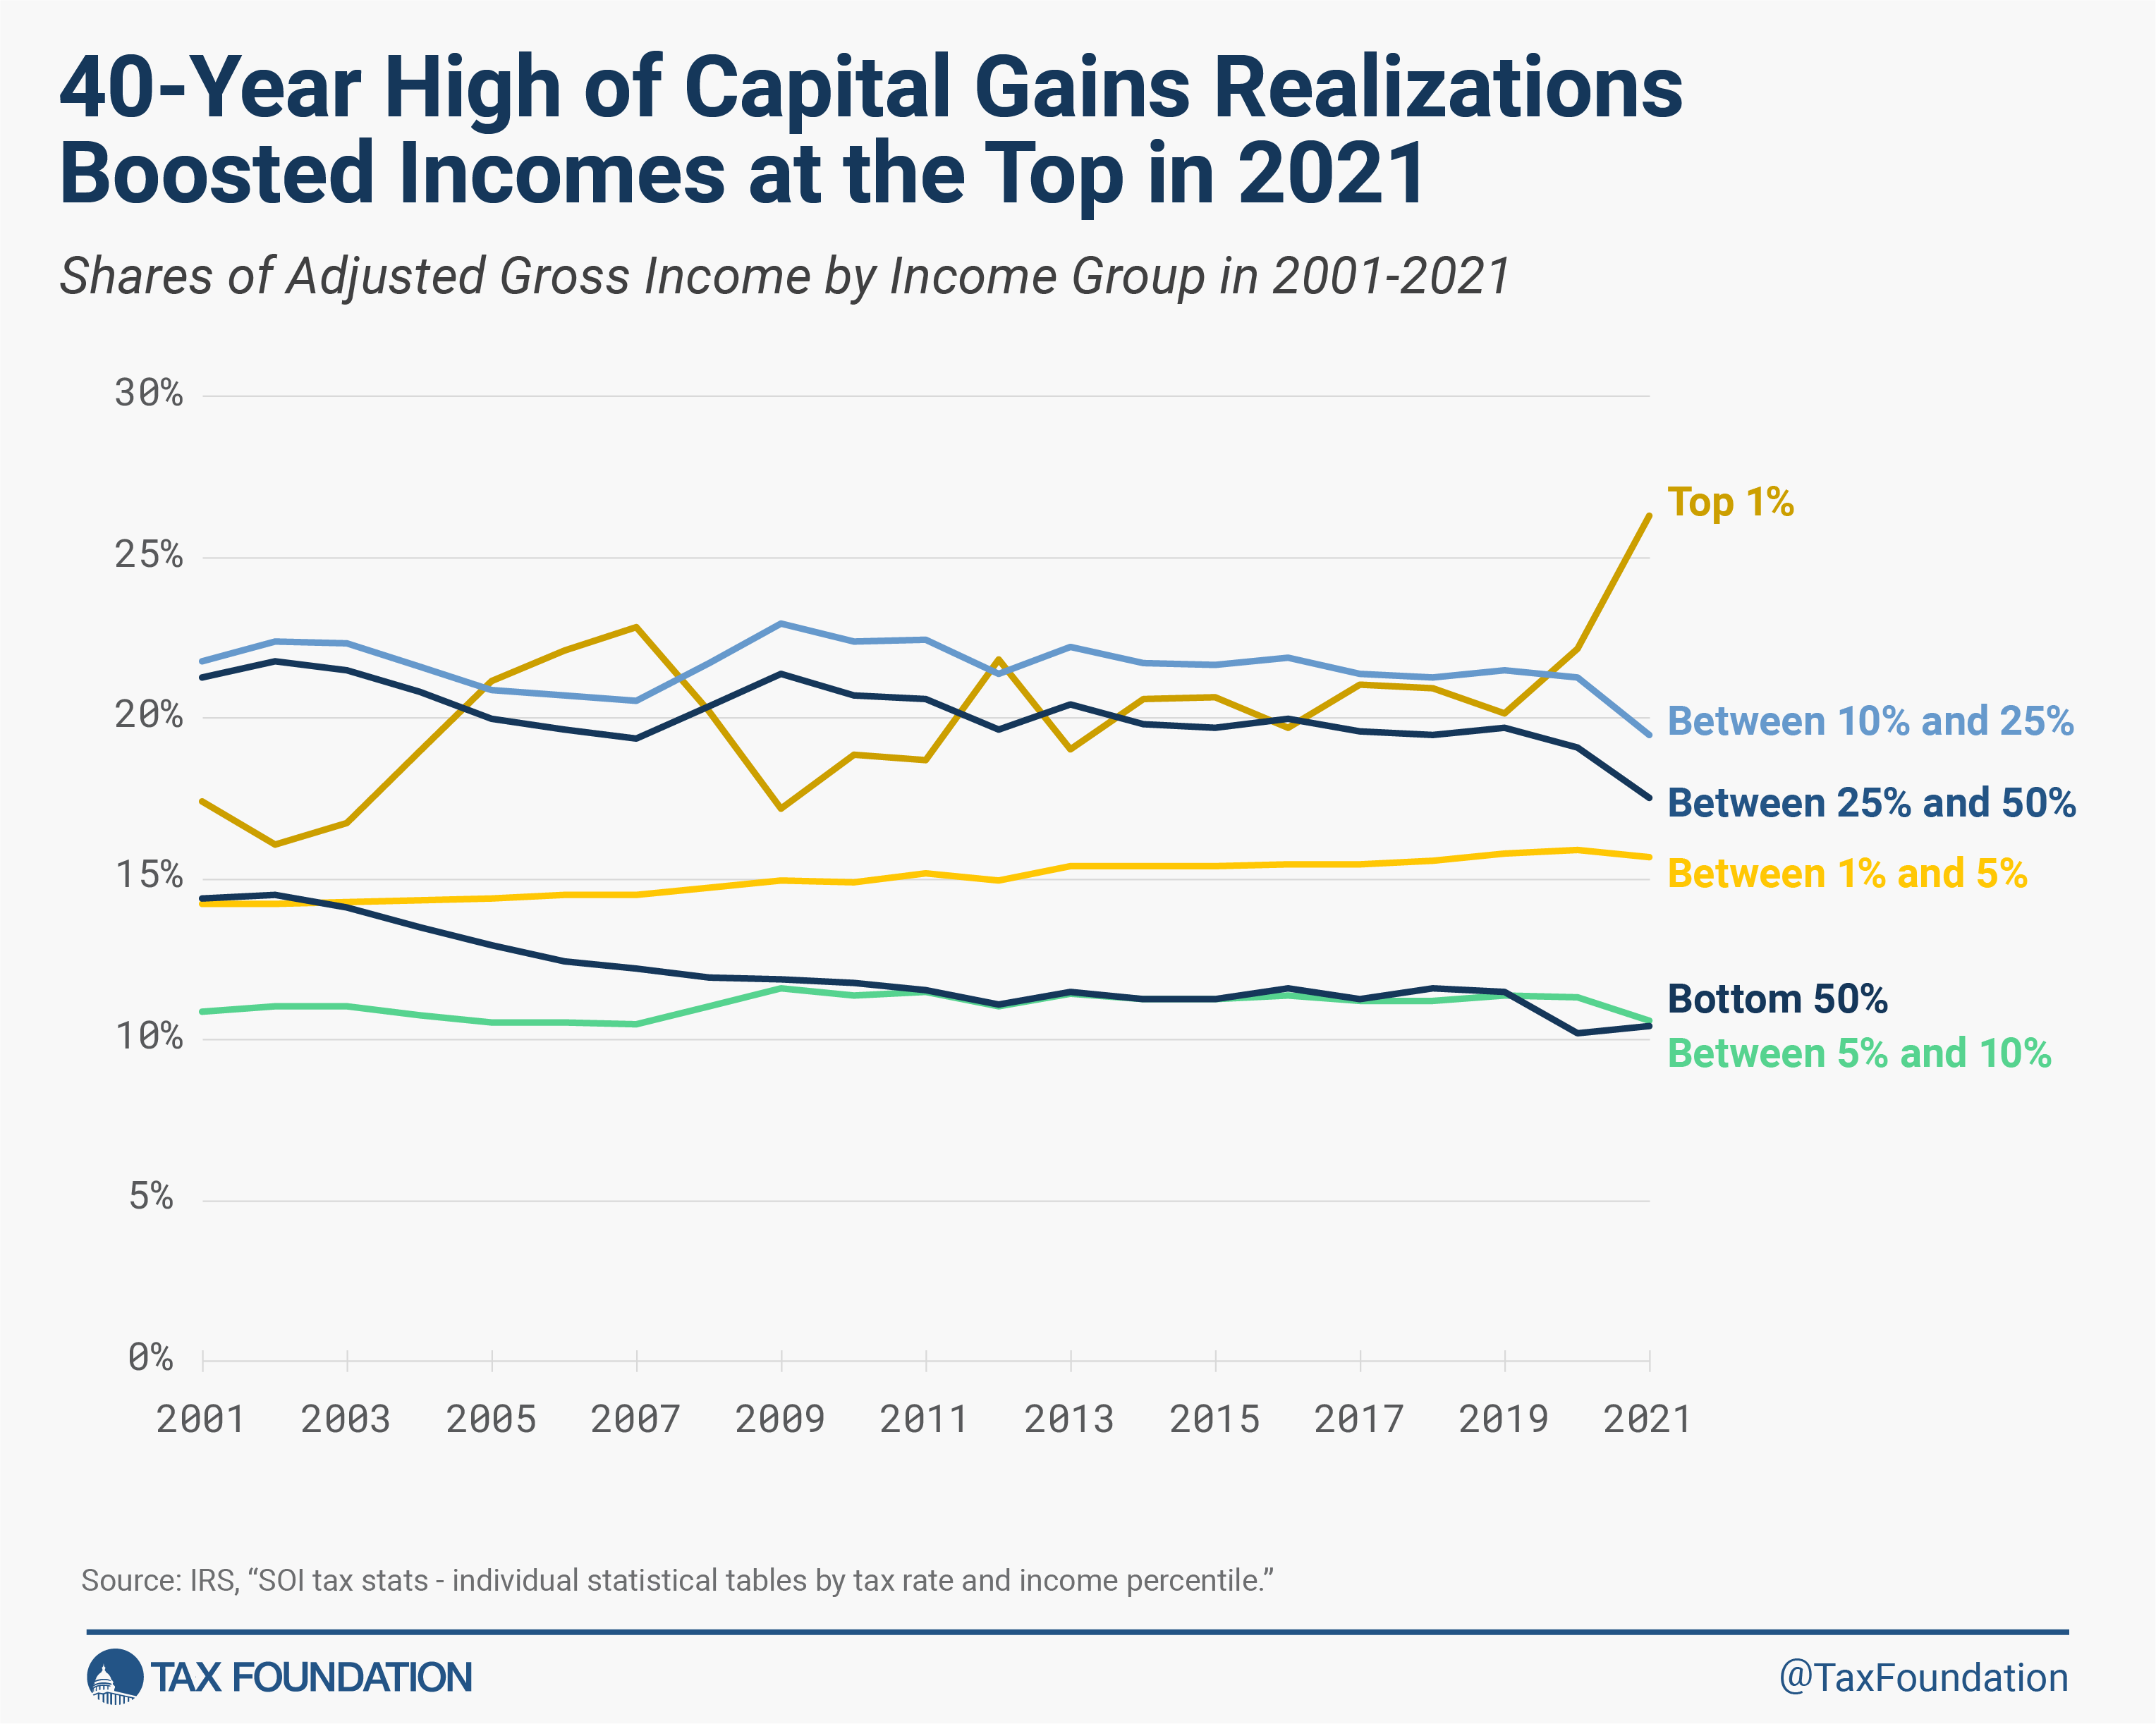 Capital gains tax realizations boosted incomes at the top 1 percent of taxpayers